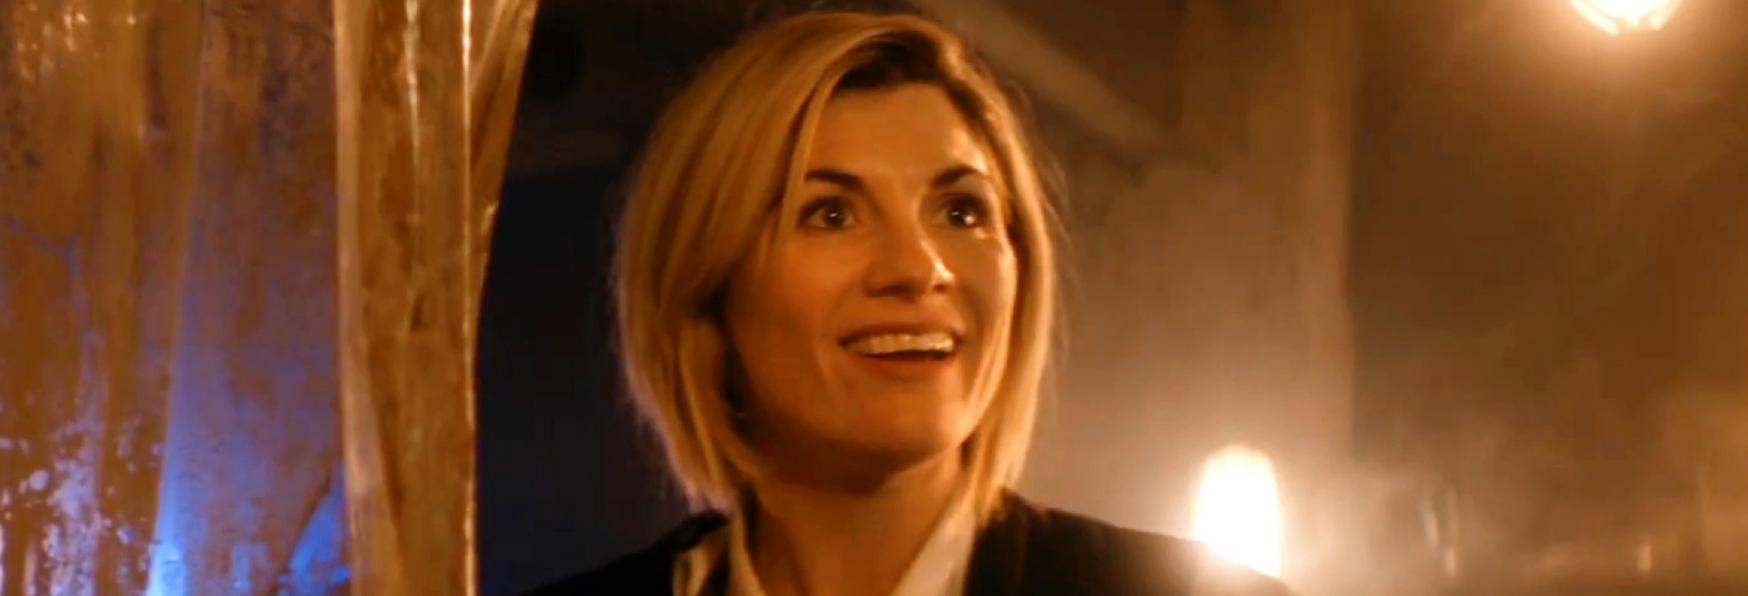 Doctor Who 13: Trailer, Poster and Photos of the Special Episode aired on New Year's Eve